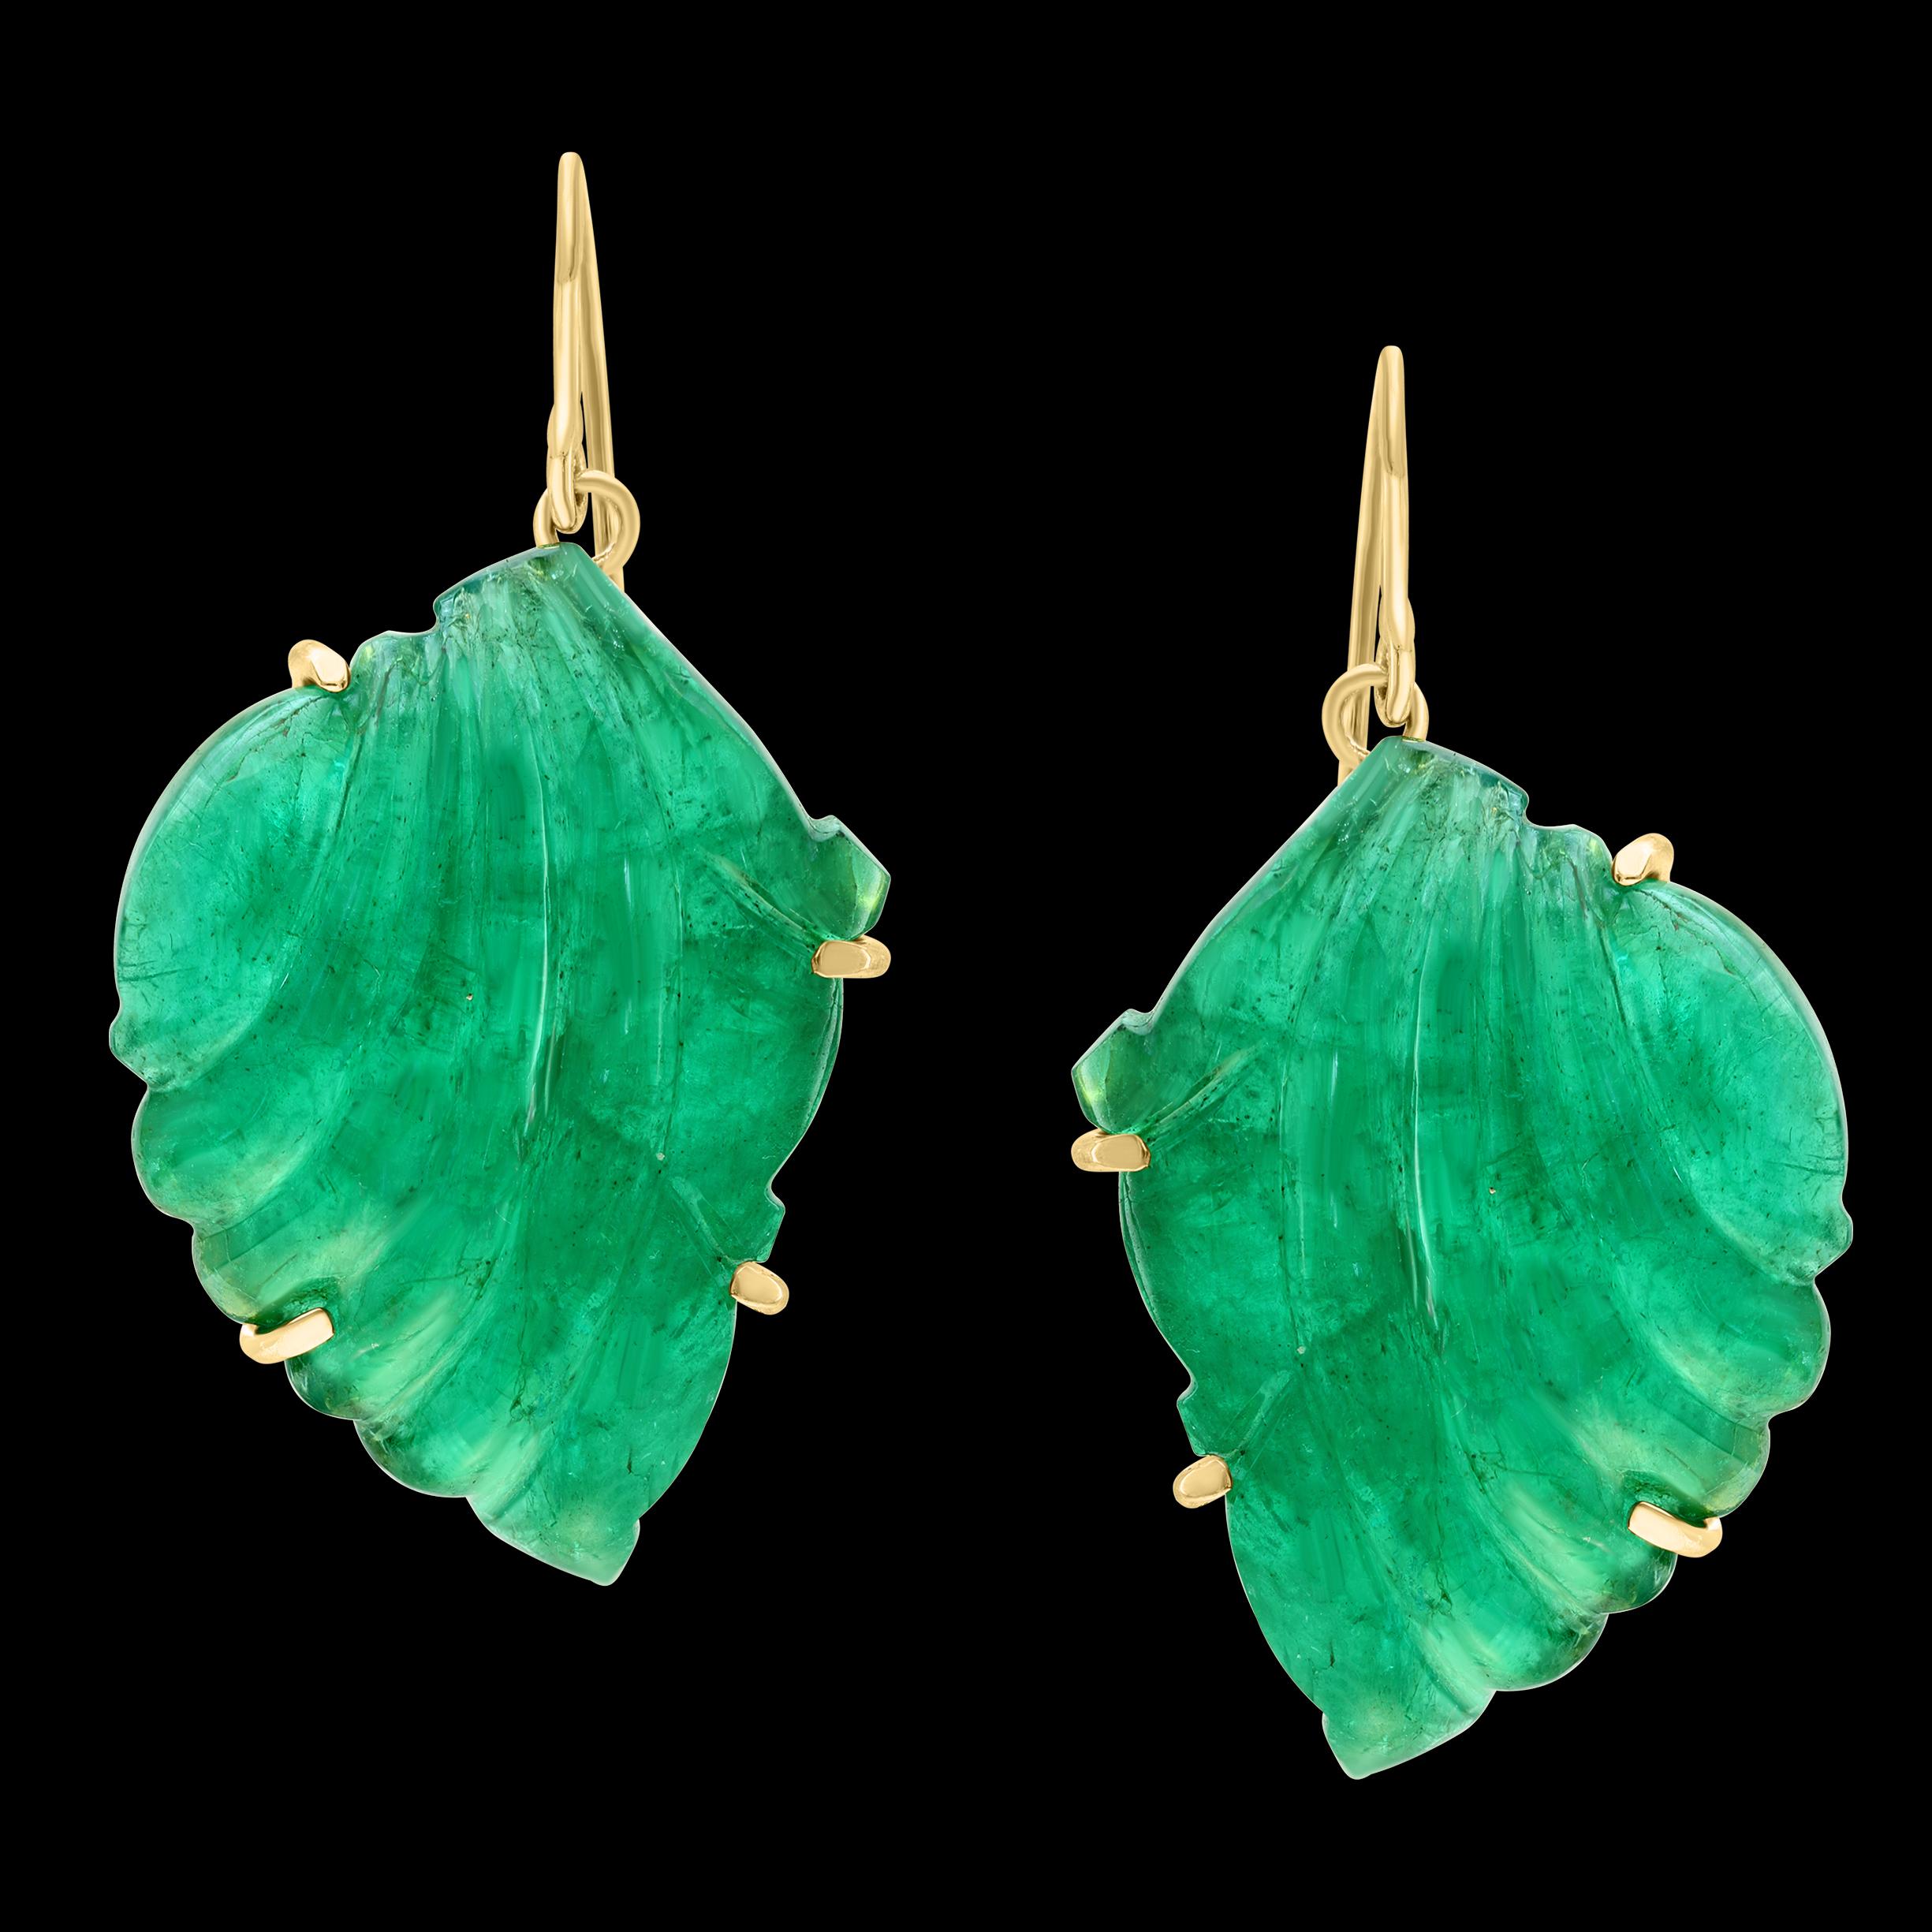 55 Ct Carved Emerald Leaf Shape Earrings 14 Kt Yellow Gold French Wire Earring For Sale 7